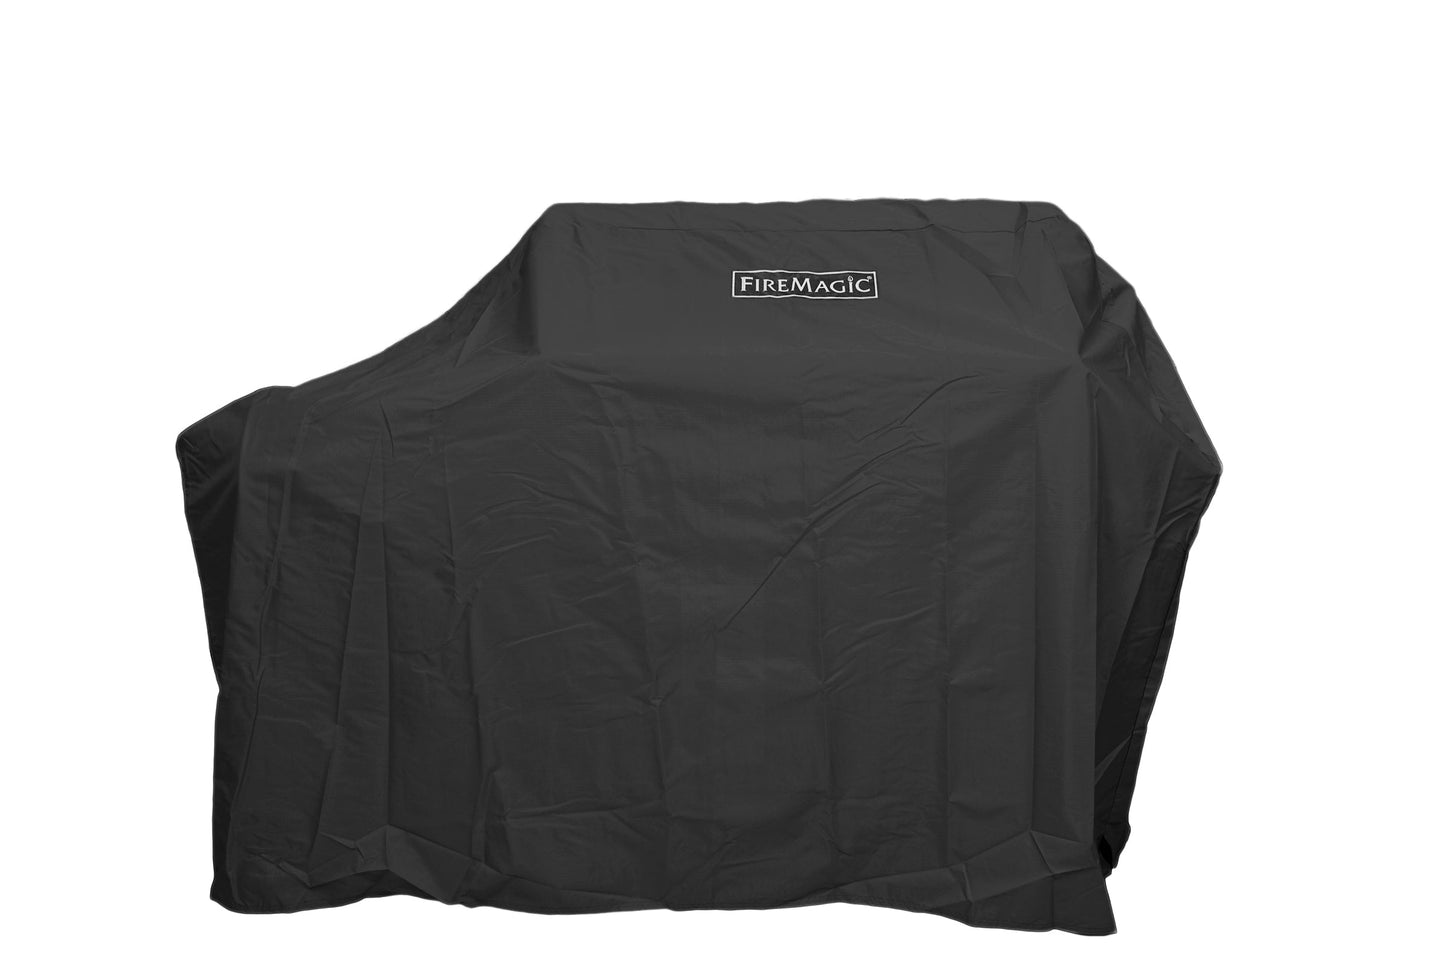 Protectice Cover for the Aurora A660s(-62) Series Grills